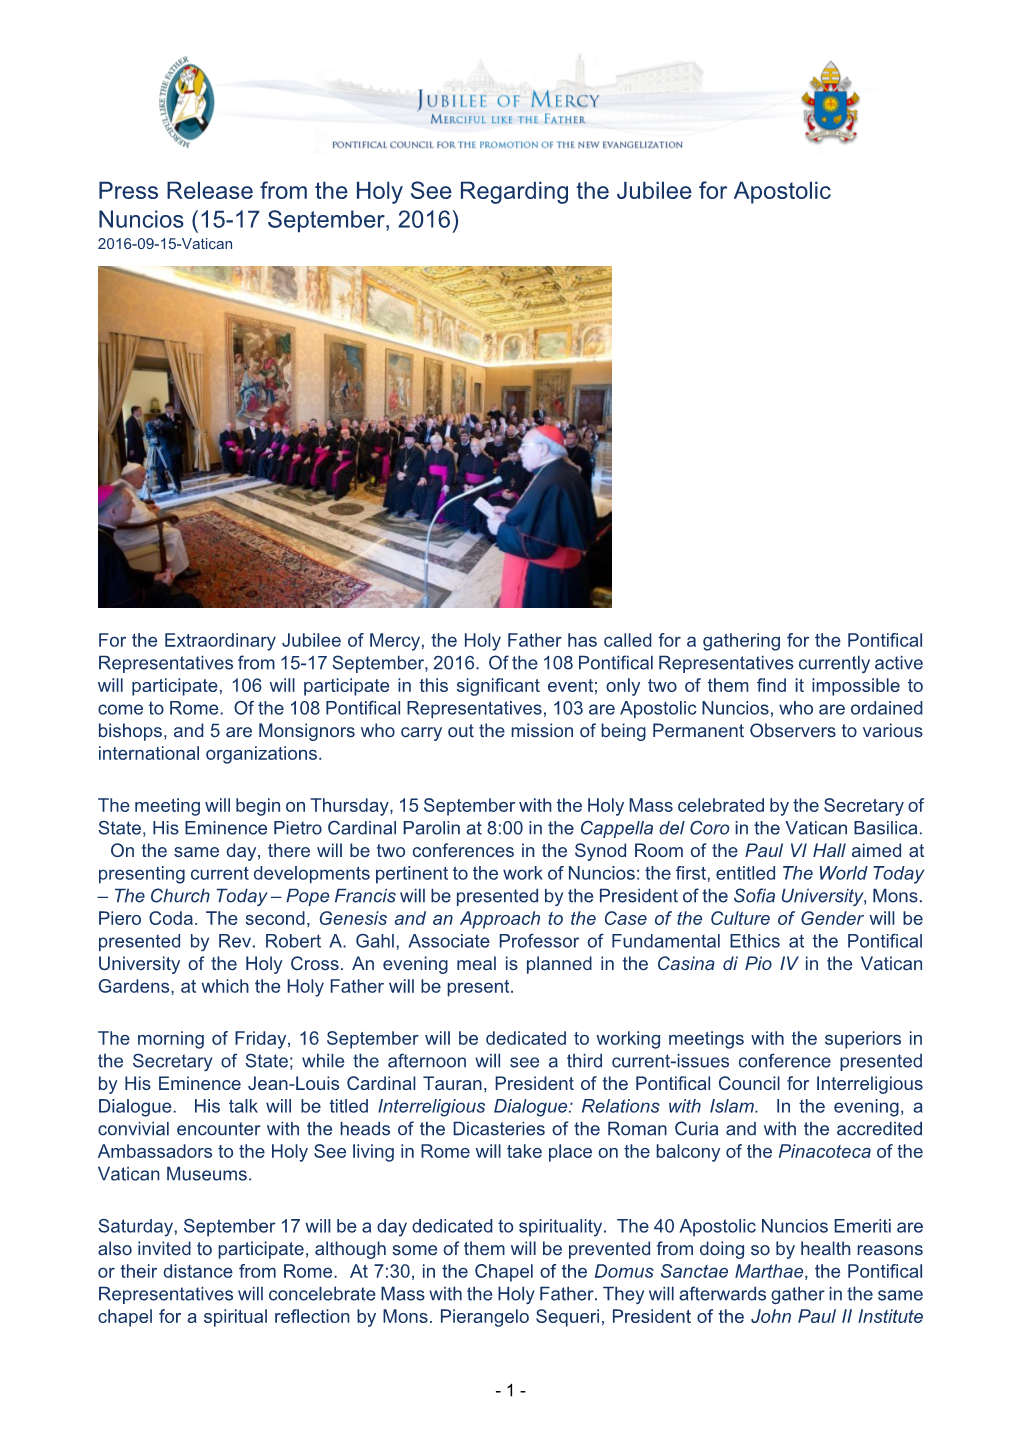 Press Release from the Holy See Regarding the Jubilee for Apostolic Nuncios (15-17 September, 2016) 2016-09-15-Vatican